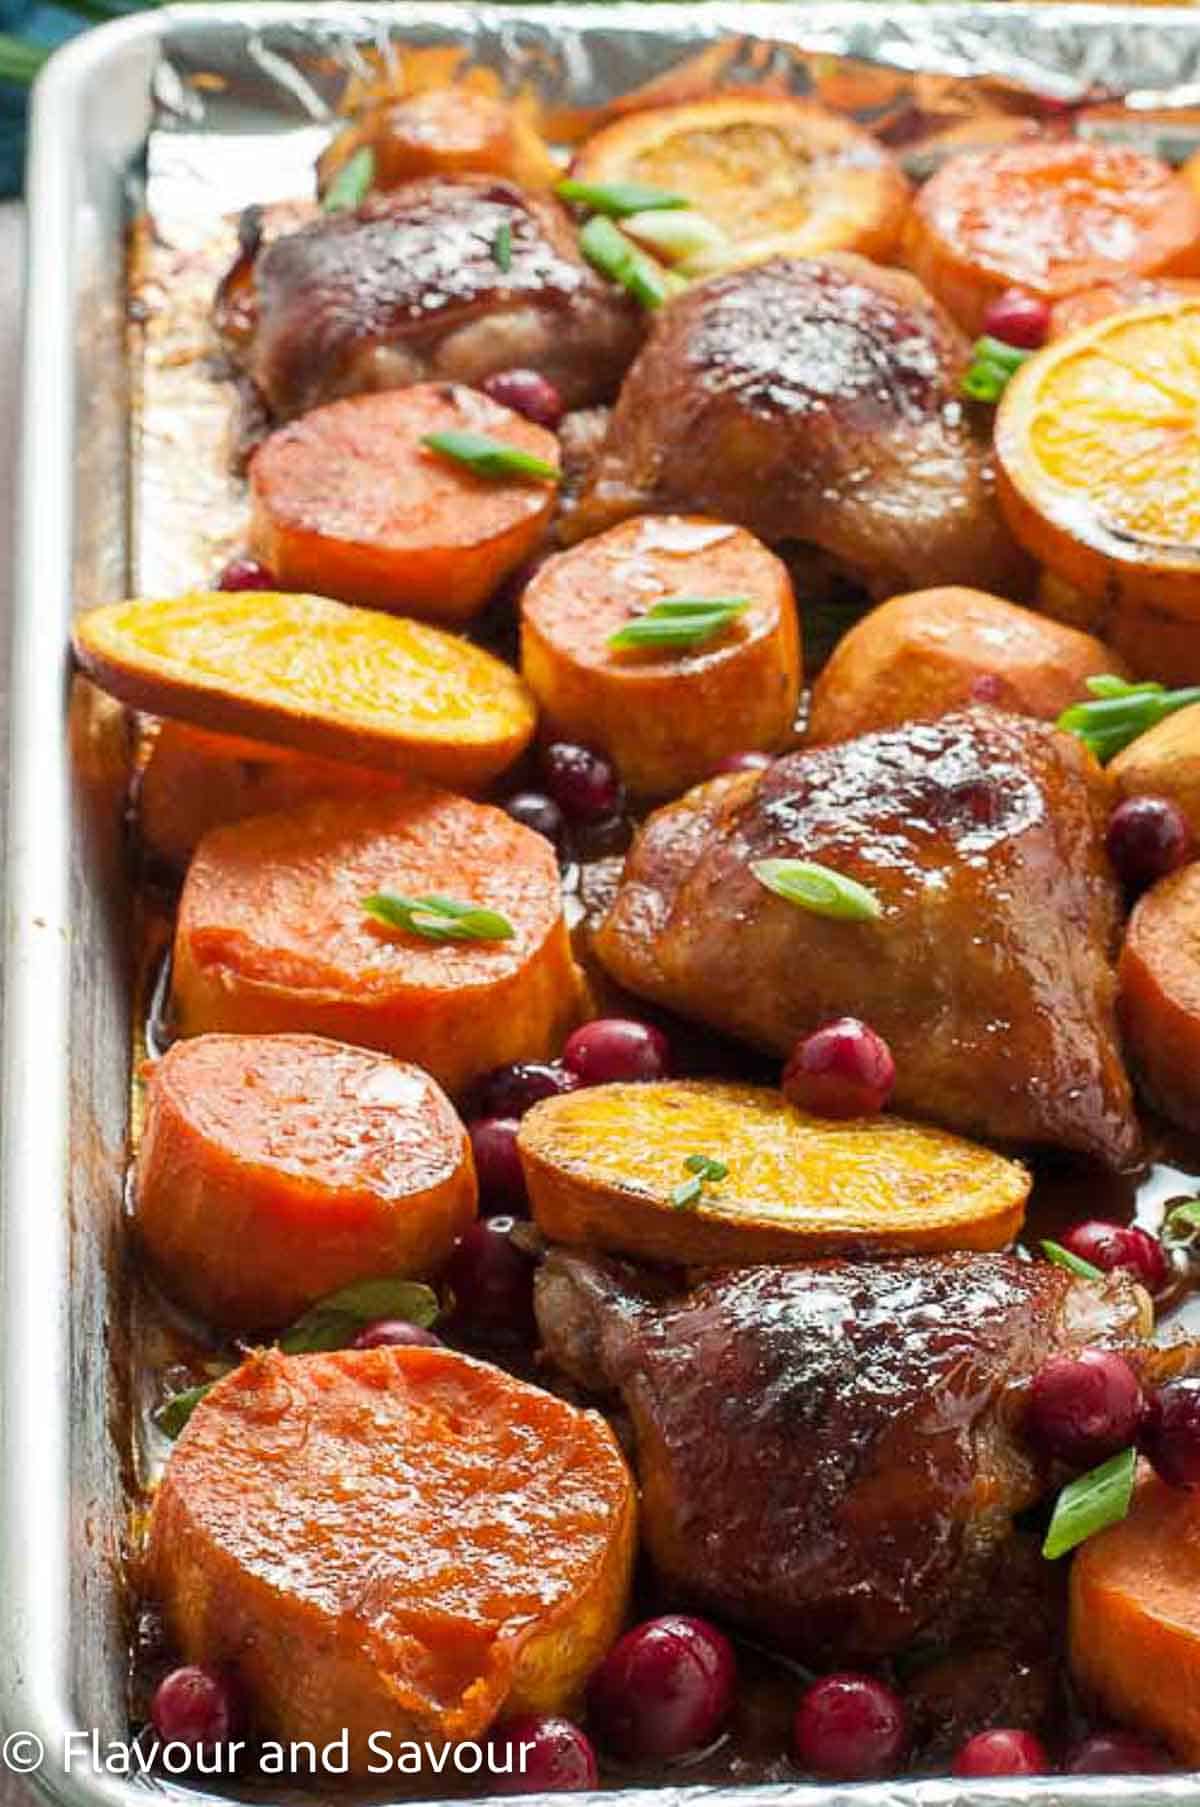 A sheet pan meal of hoisin chicken, sweet potatoes, oranges and cranberries.